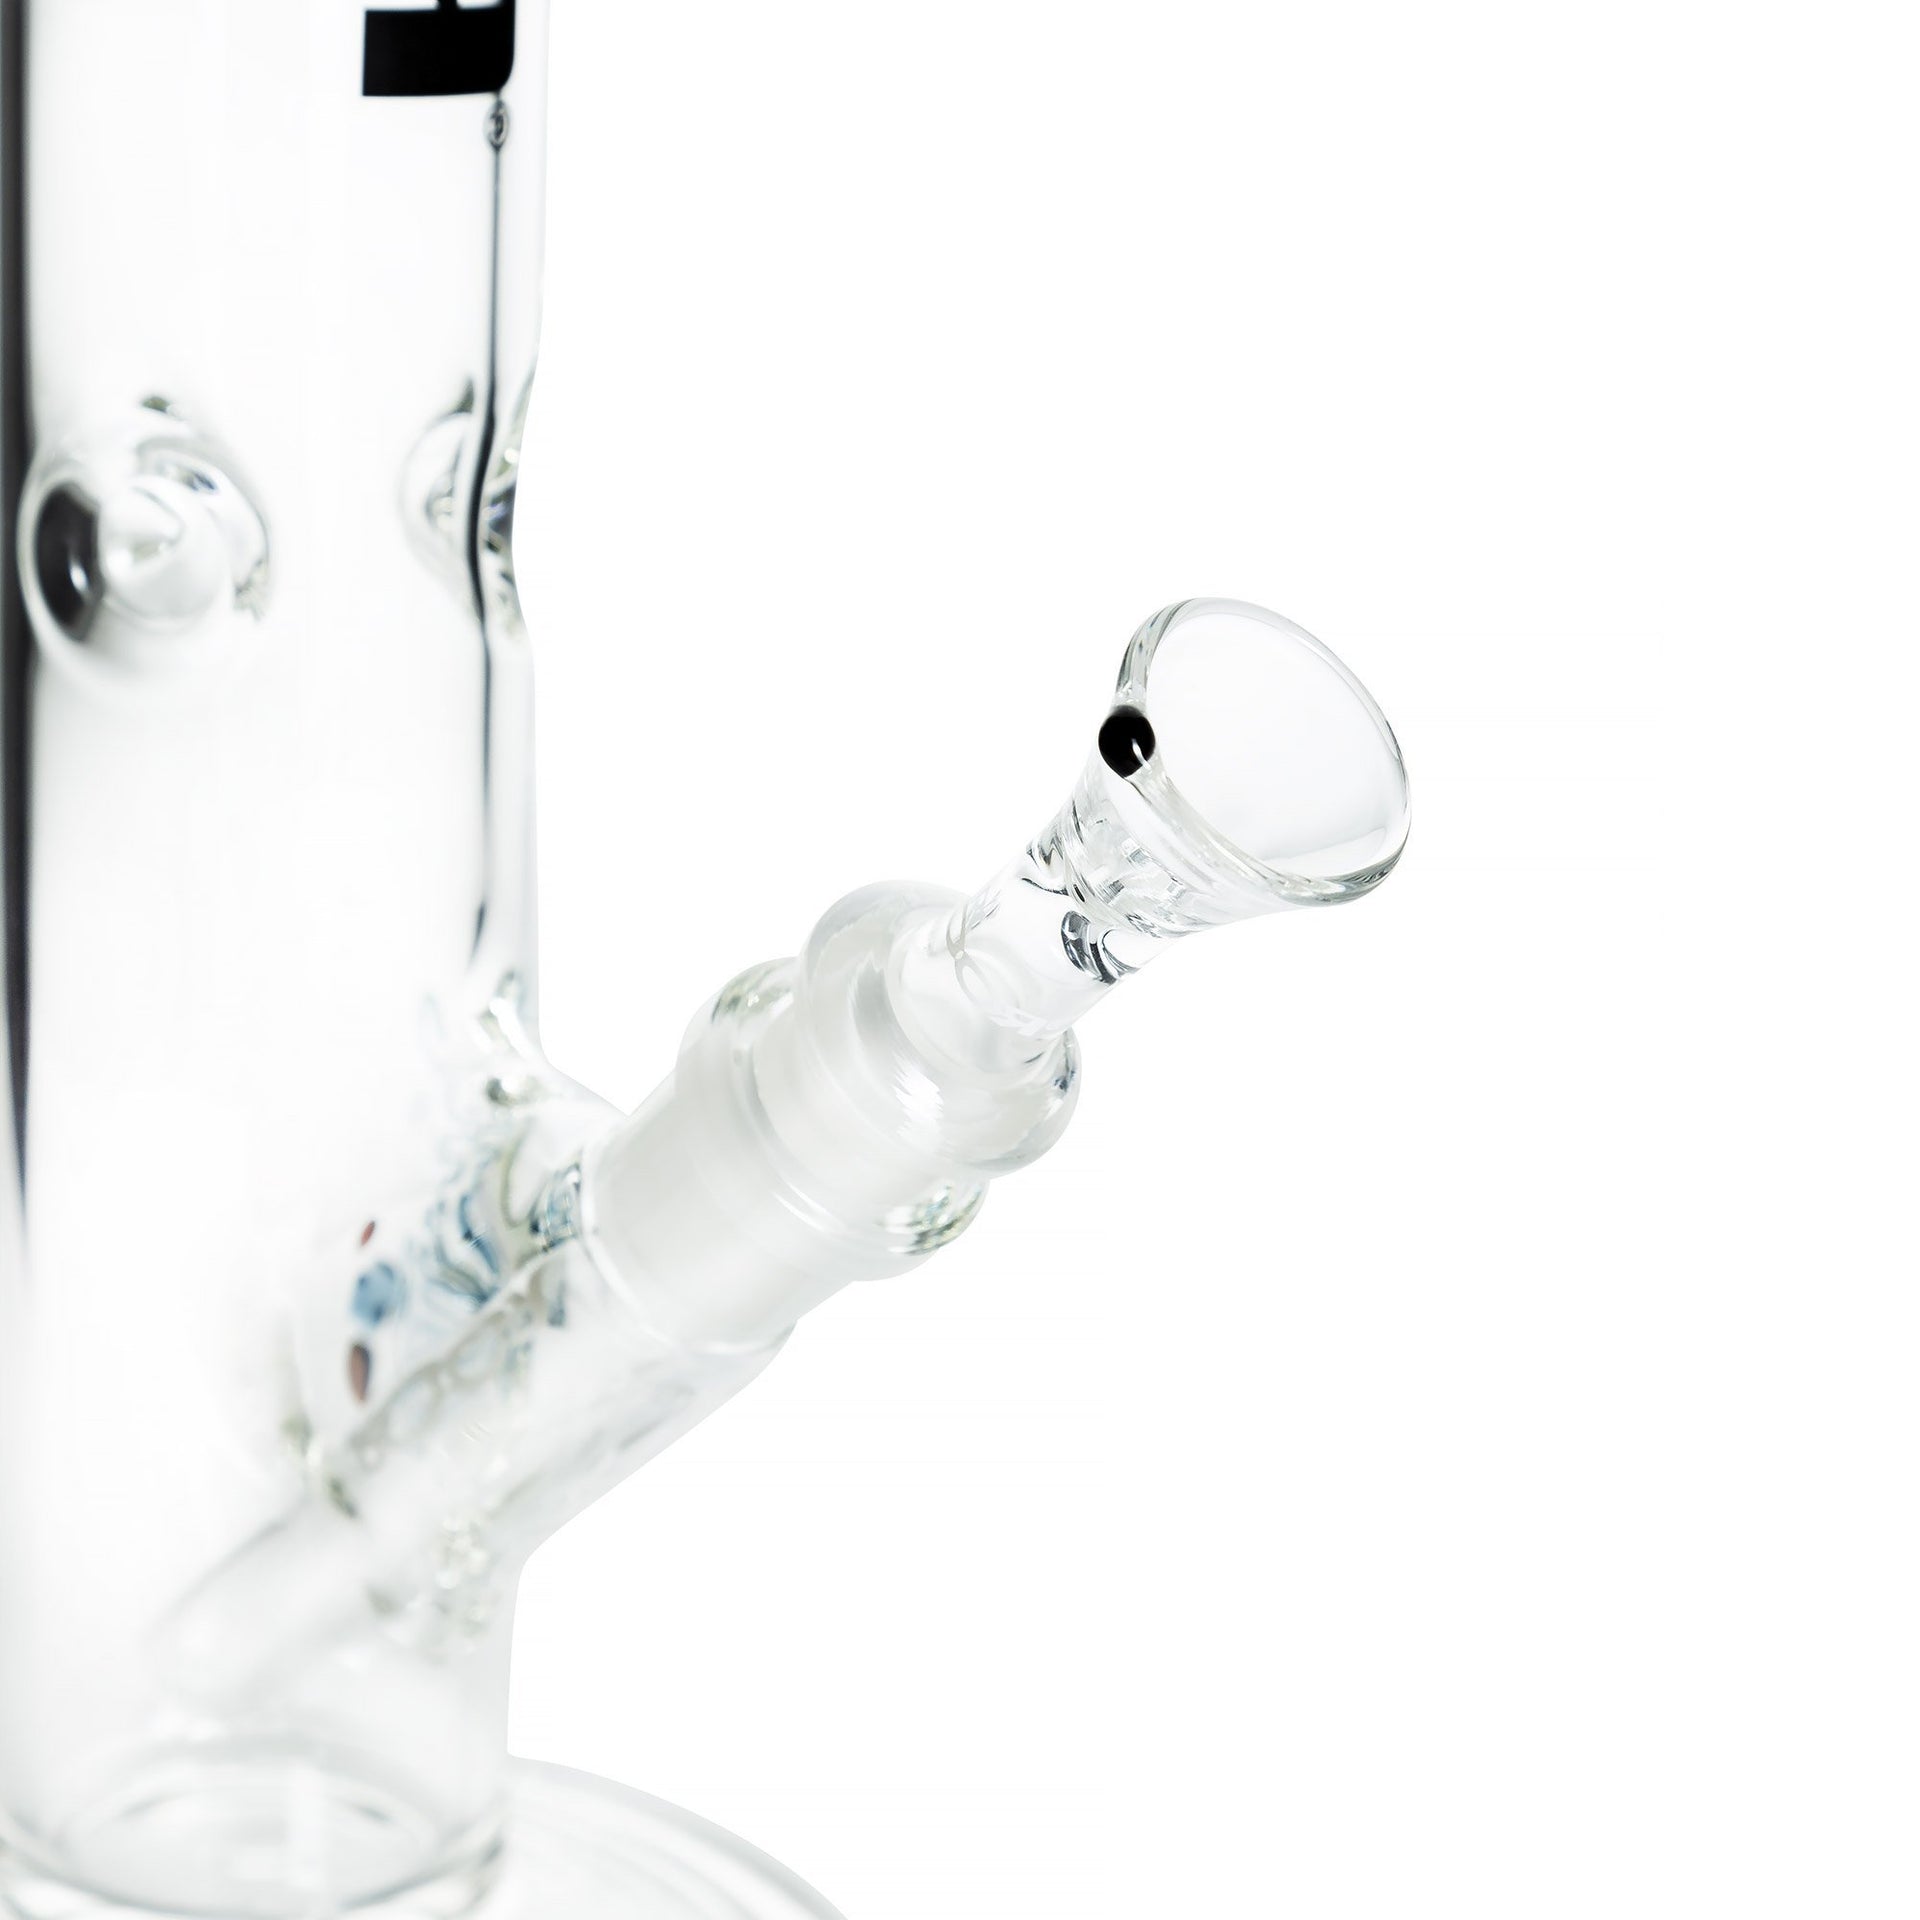 ROOR 14mm Funnel Bowl - 420 Science - The most trusted online smoke shop.